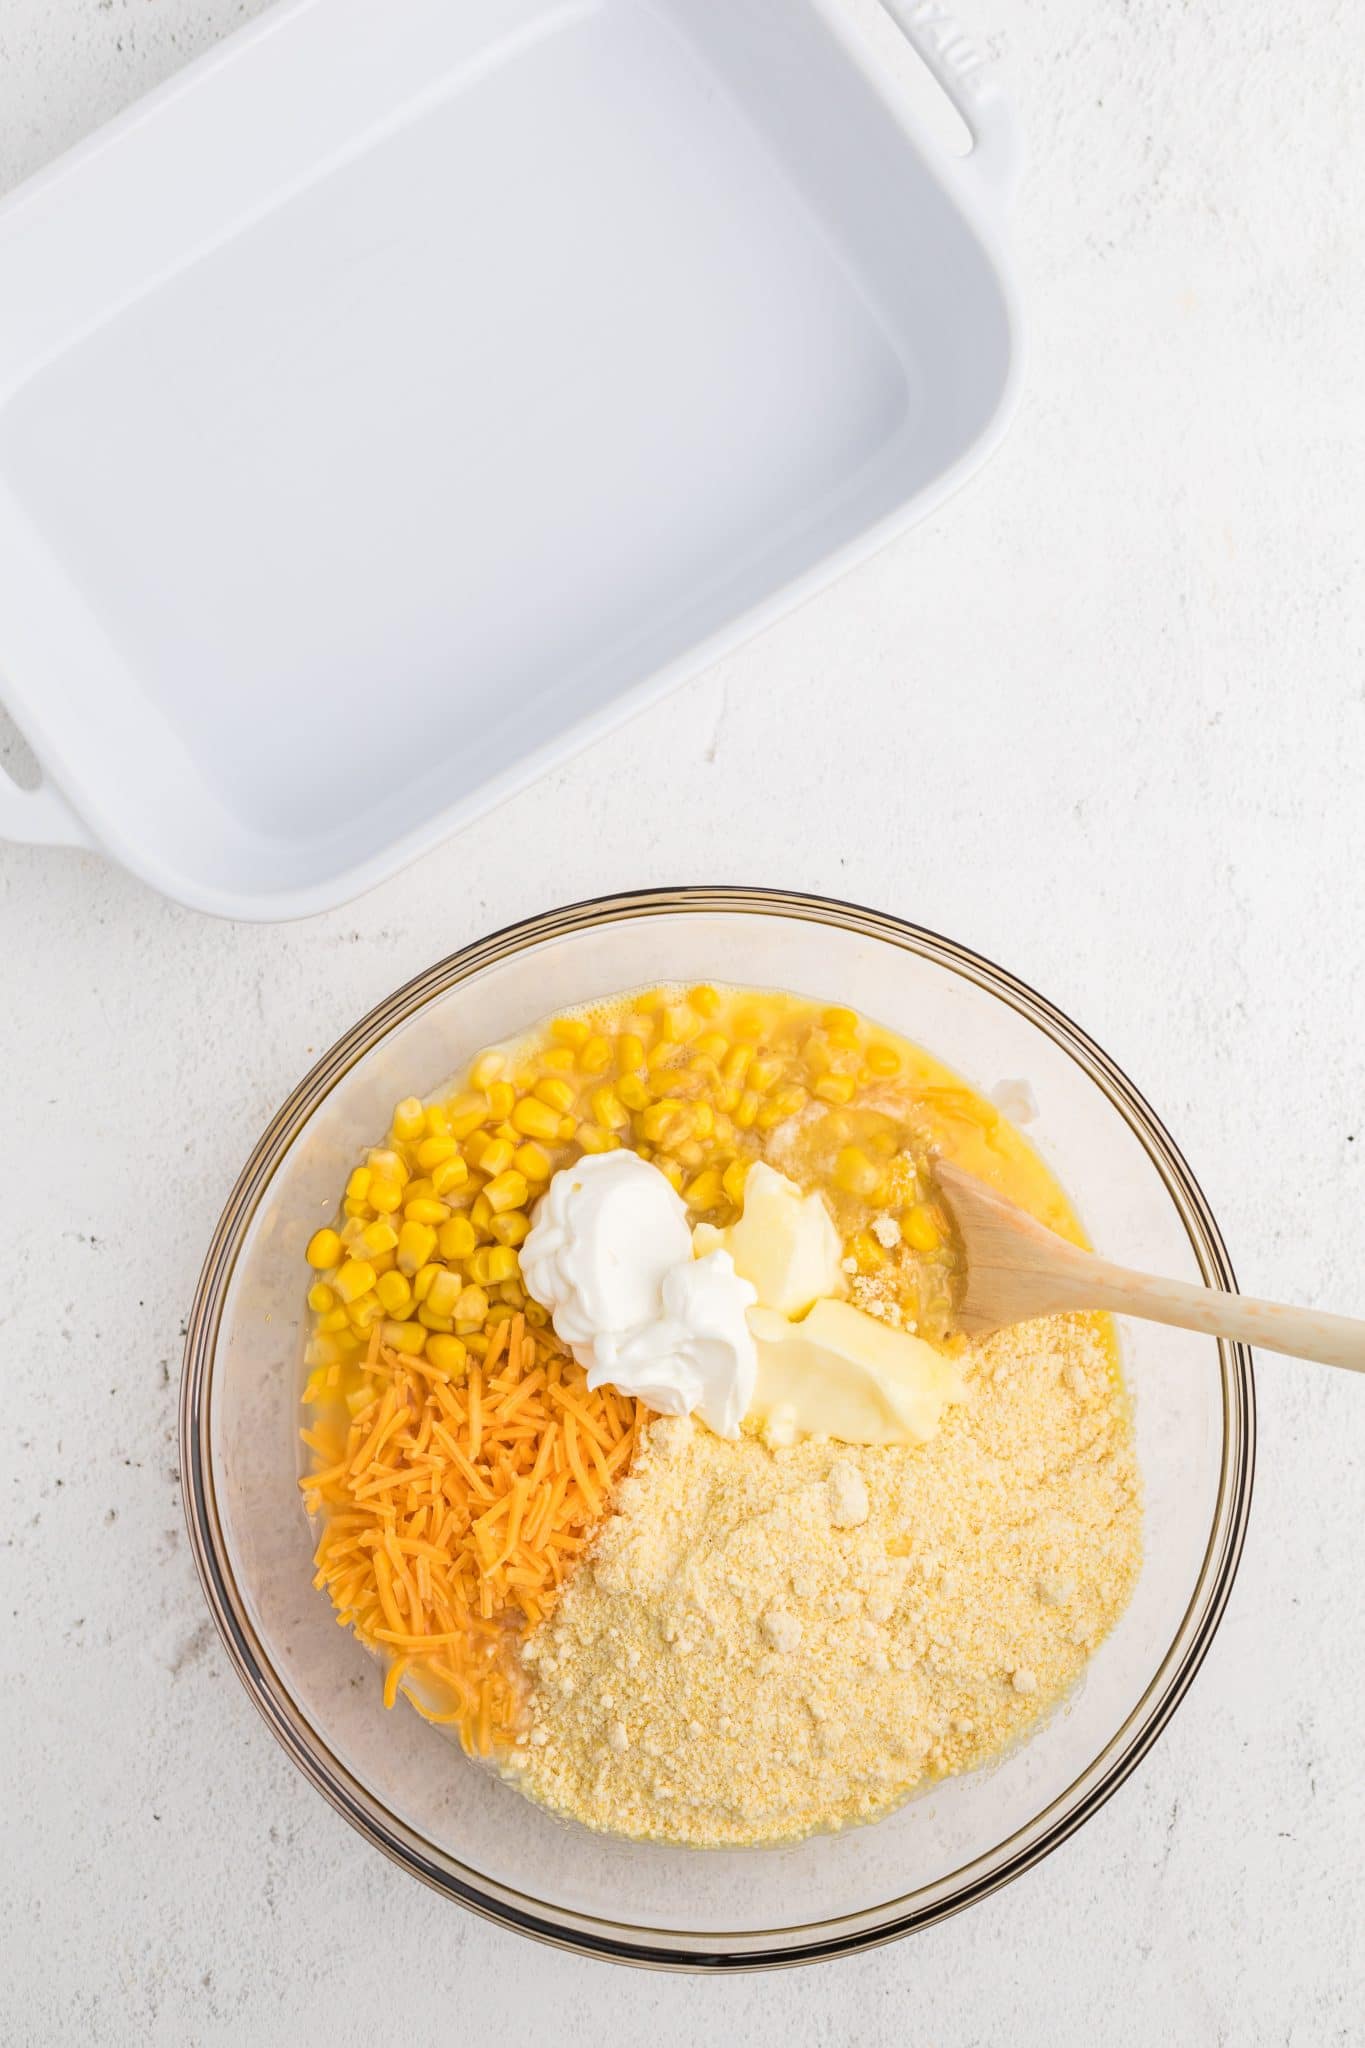 Corn casserole ingredients in a mixing bowl